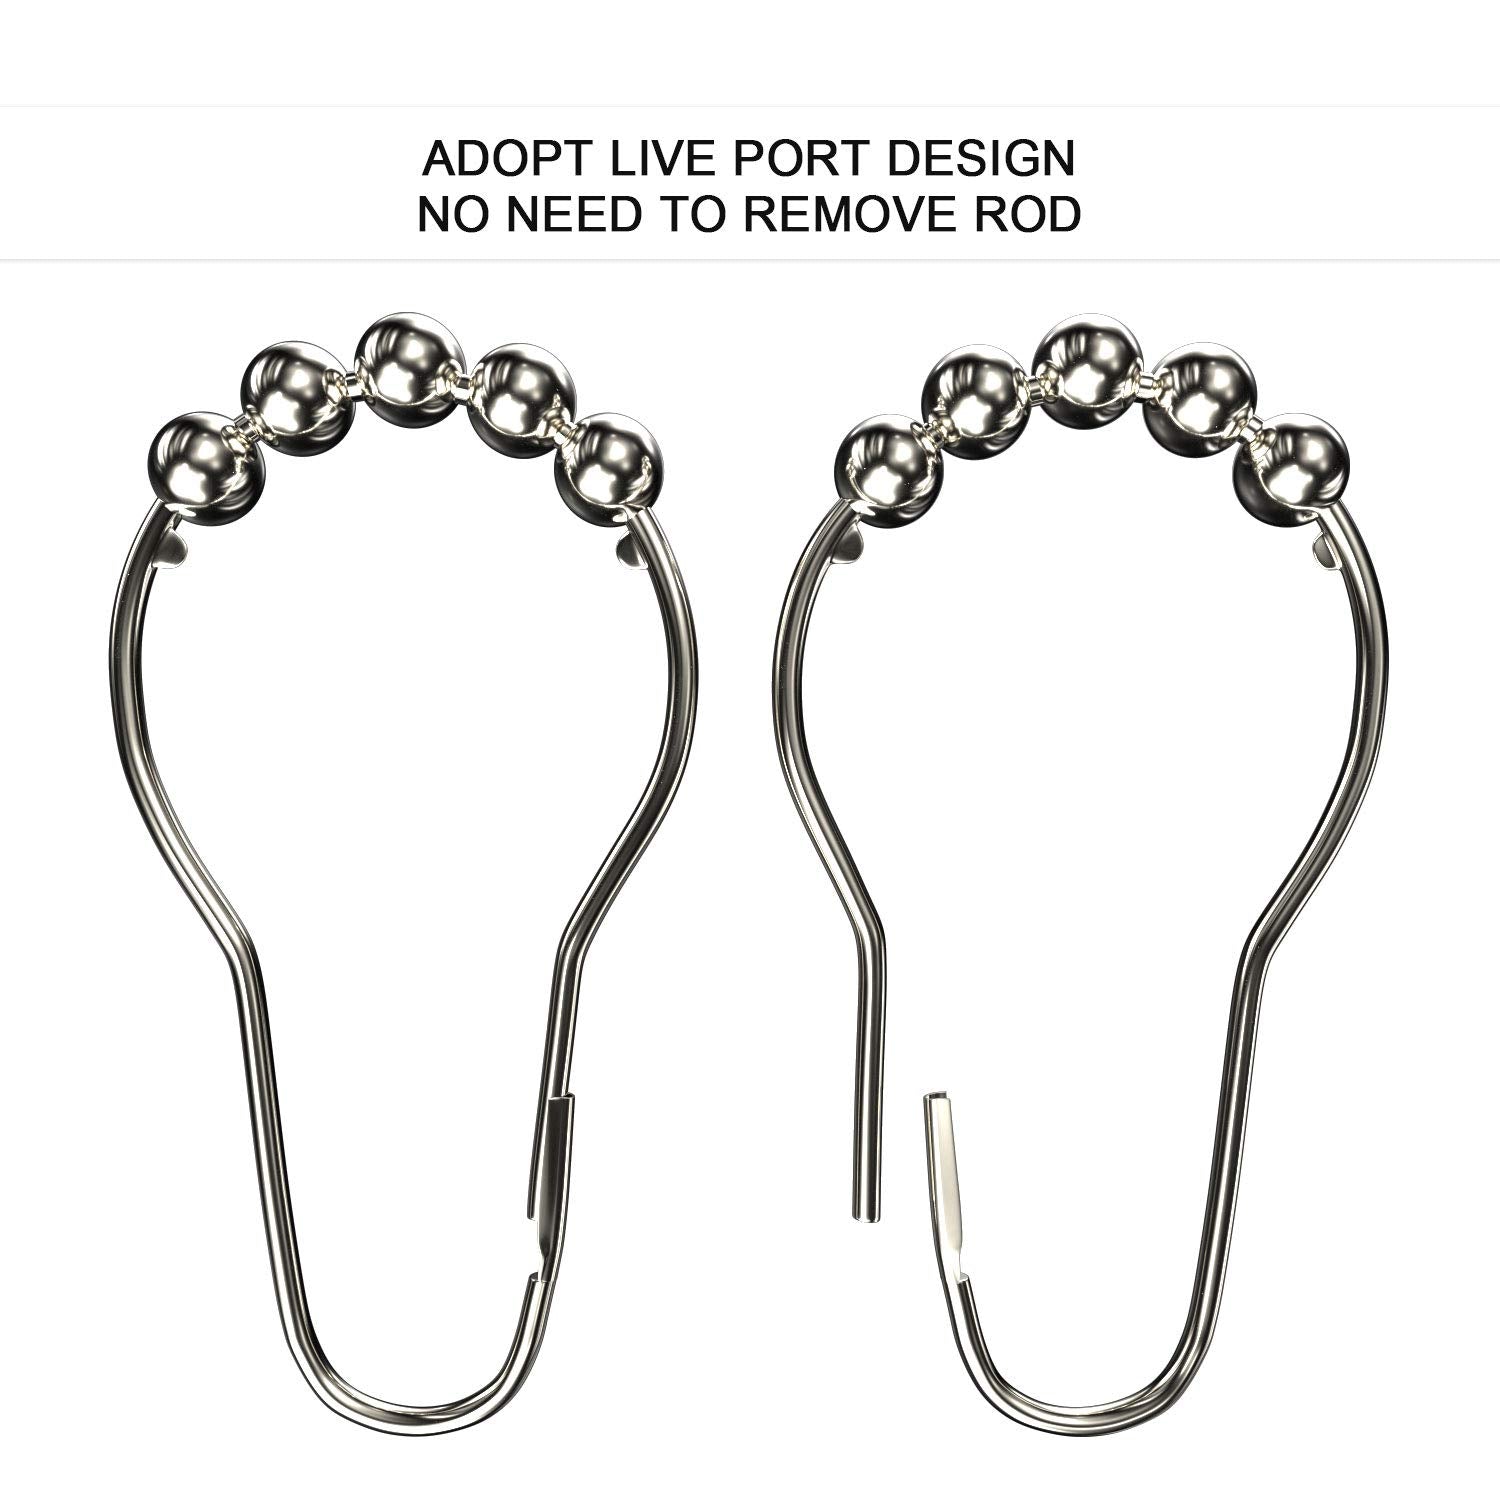 Rustproof Metal Glide Curtain Rings for Bedroom/Bathroom Curtains Rods 10 Pcs KGORGE Store